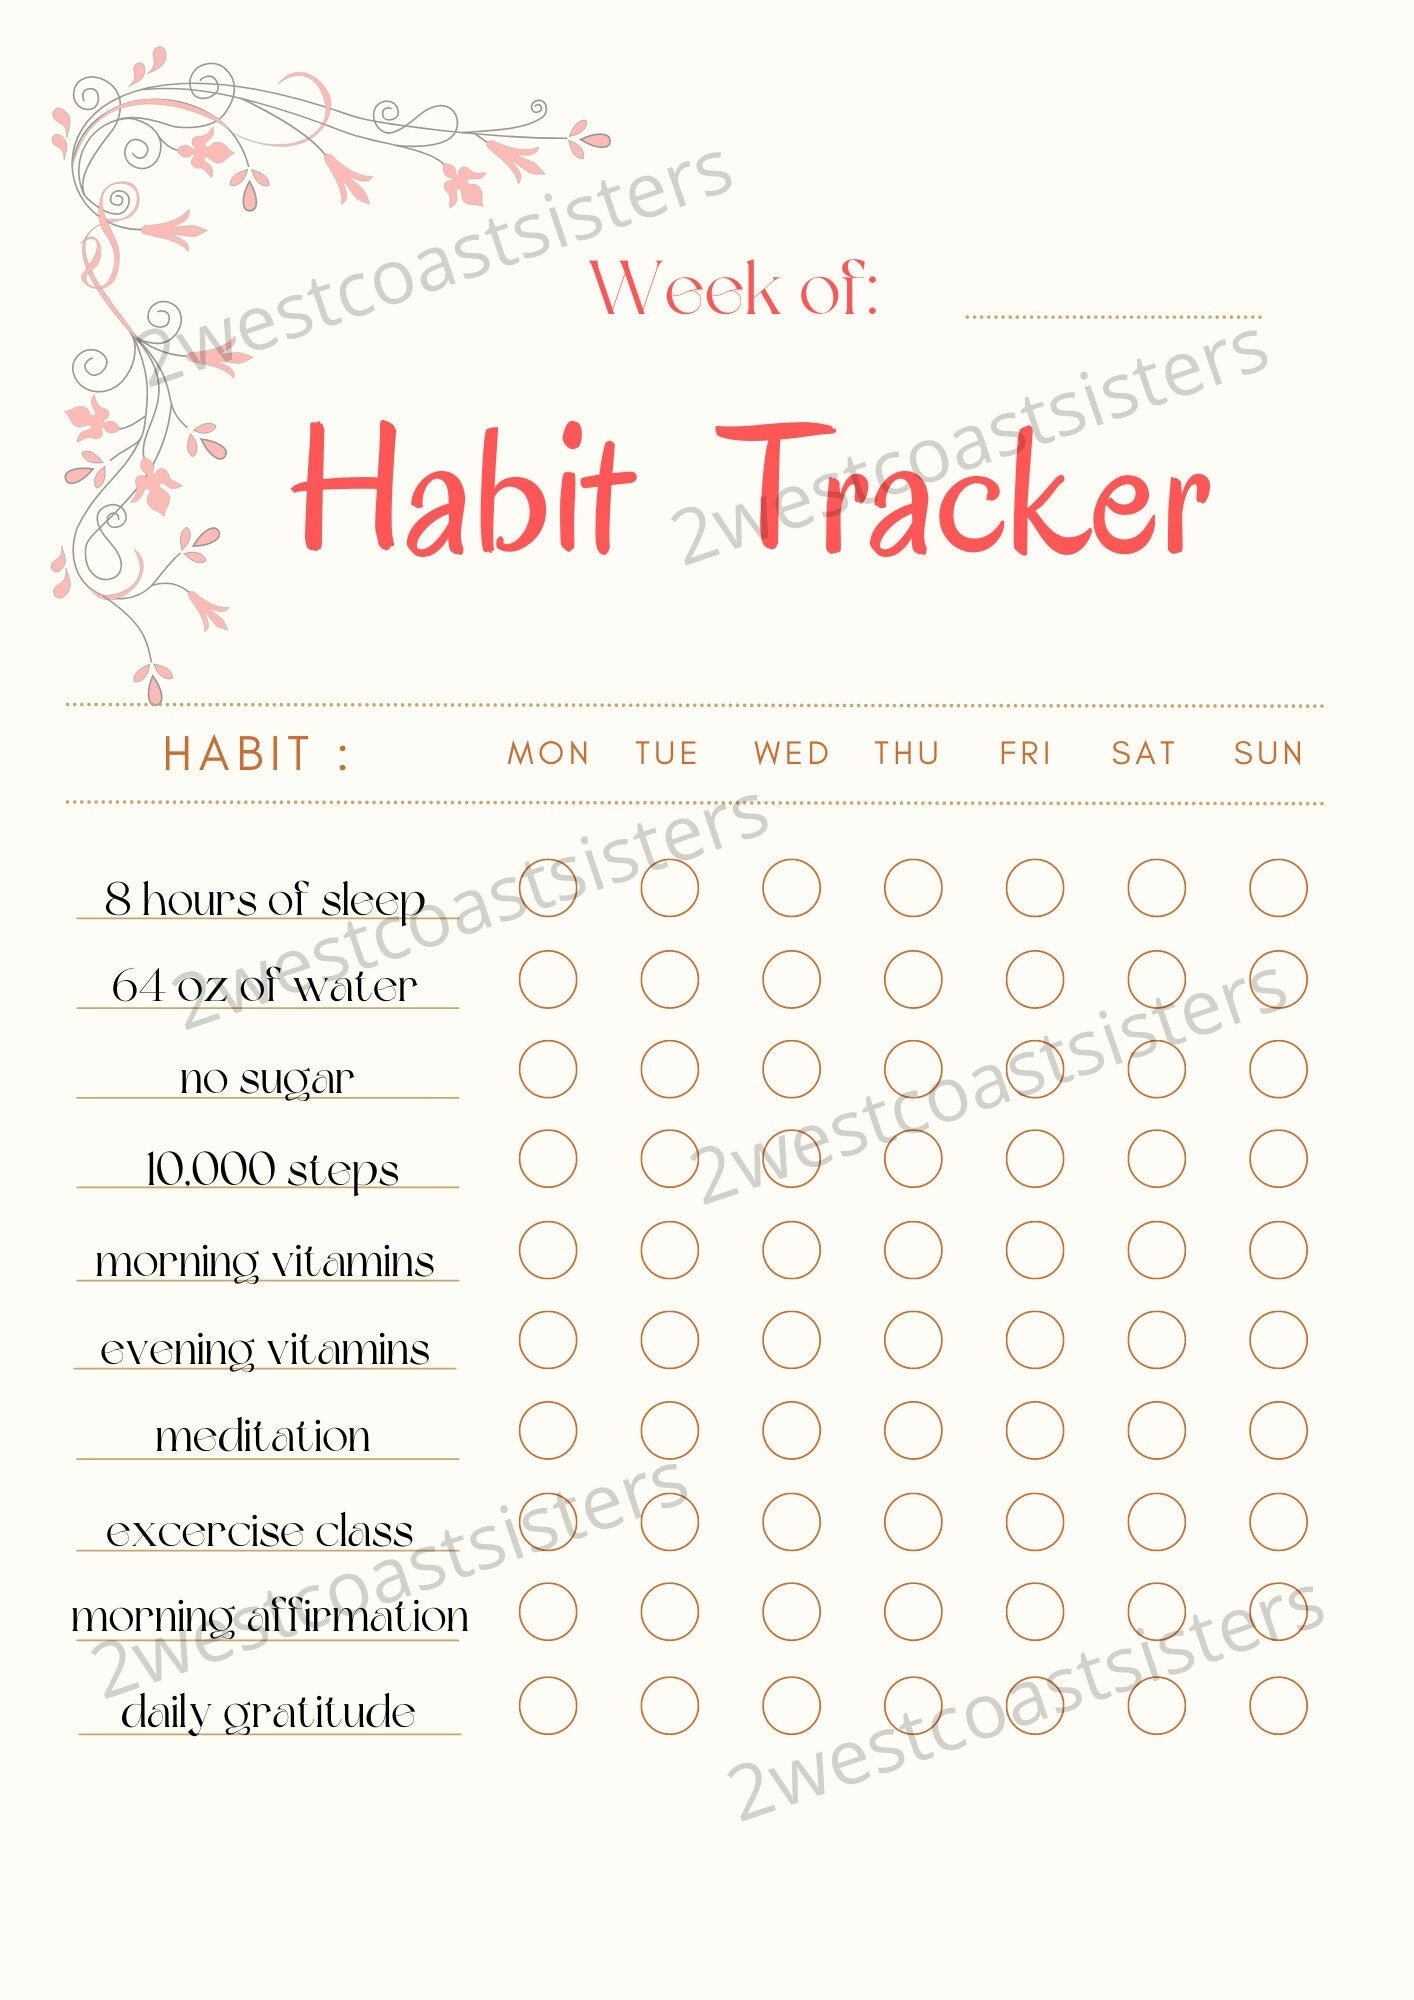 The Complete Guide to Habit Trackers (+ Habit Tracker Template) - Yop & Tom